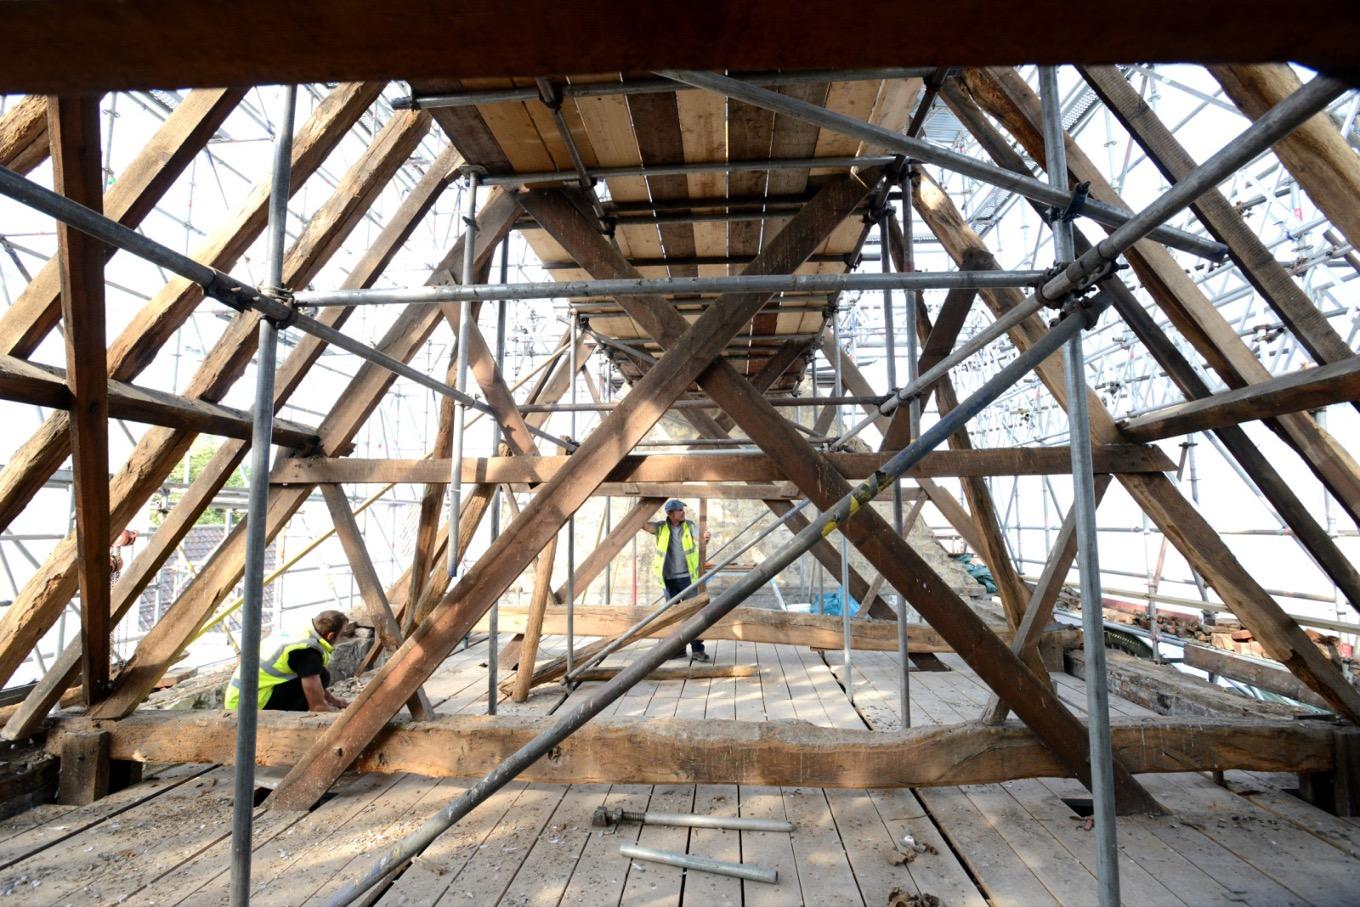 St Marys guildhall roof construction works